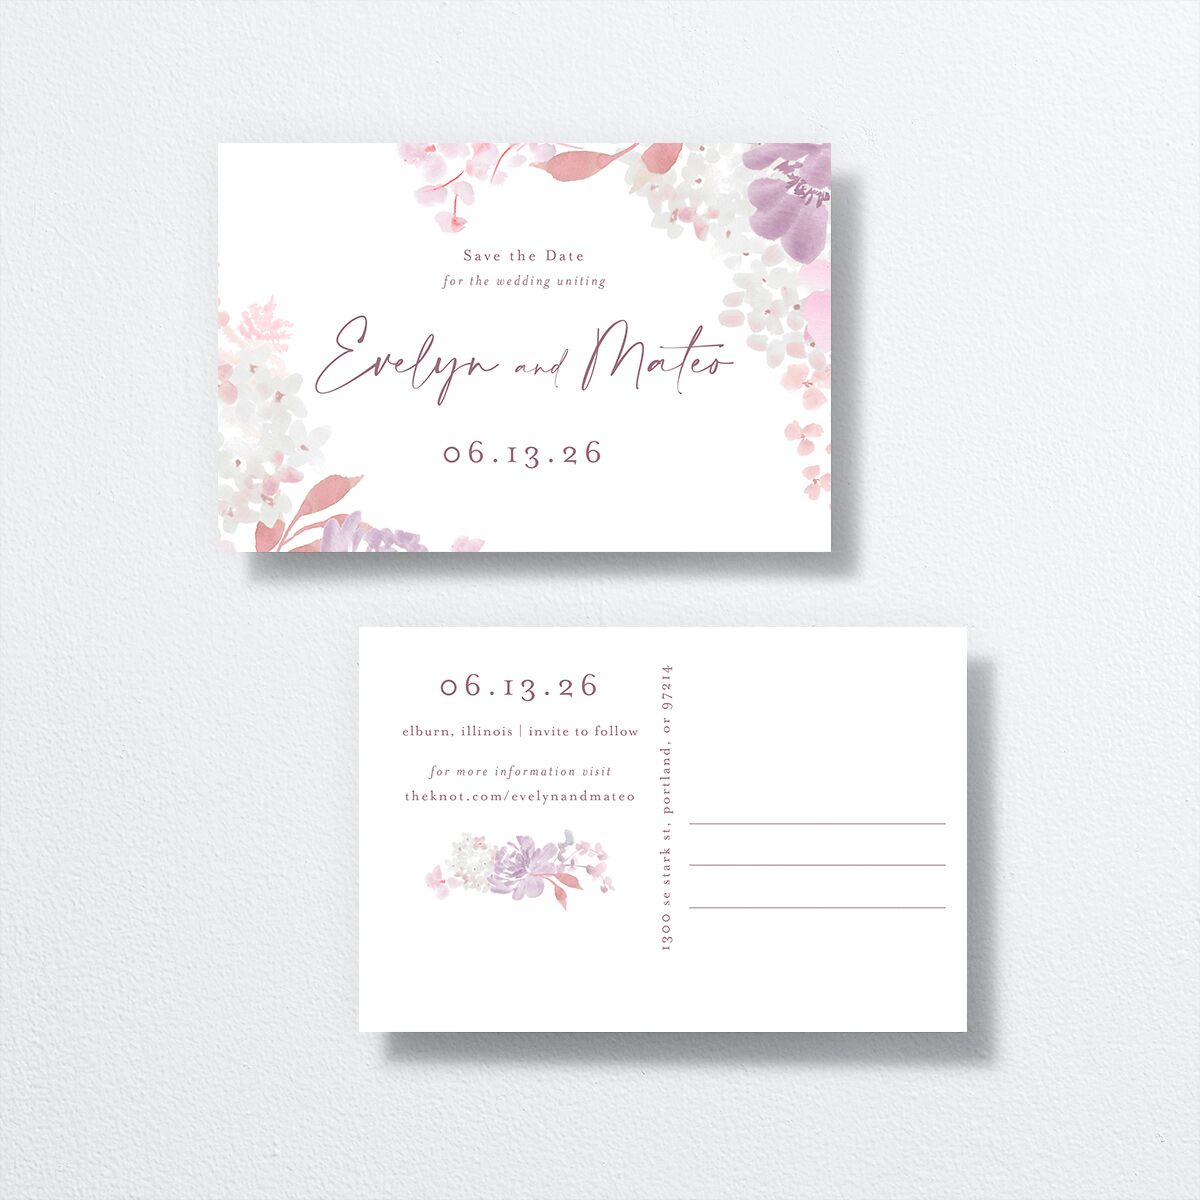 Hydrangea Garden Save The Date Postcards front-and-back in purple